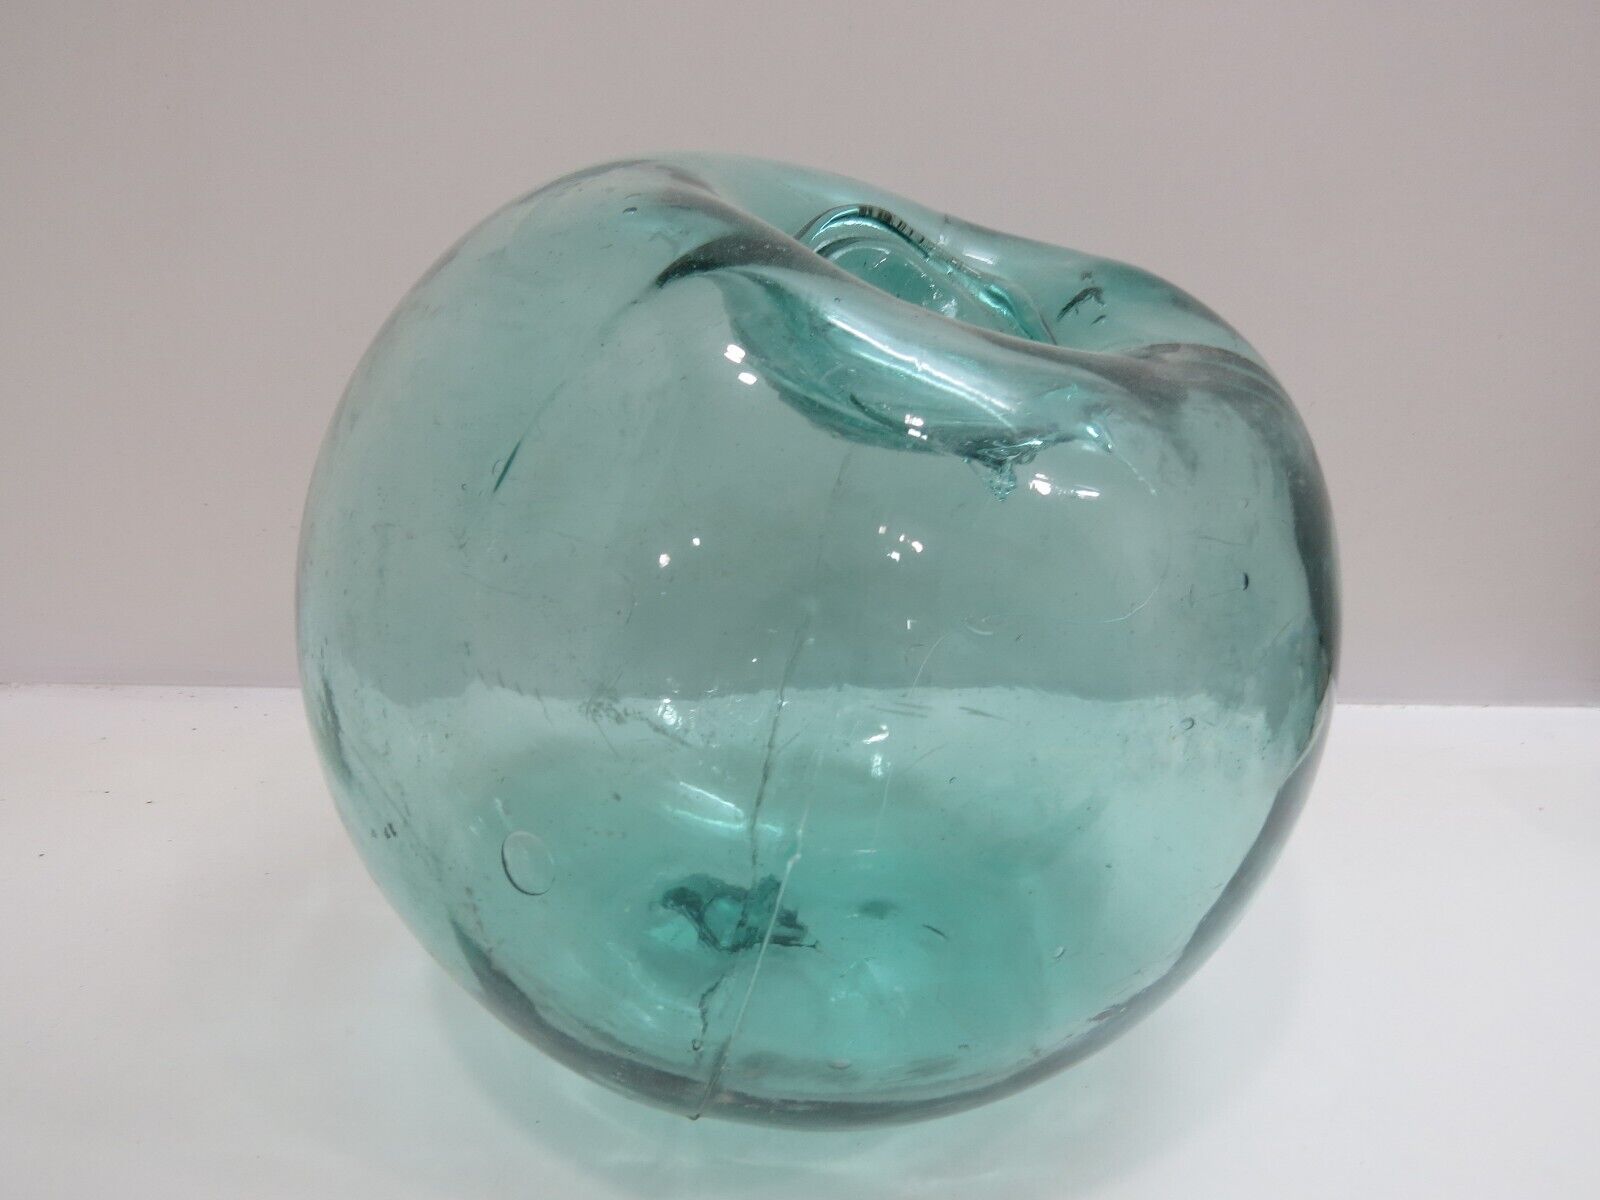 (X2088) 9.47 INCH RARE HUGE SPINDLE CHINESE SEAMER GLASS FLOAT BALL BUOY BOUY 